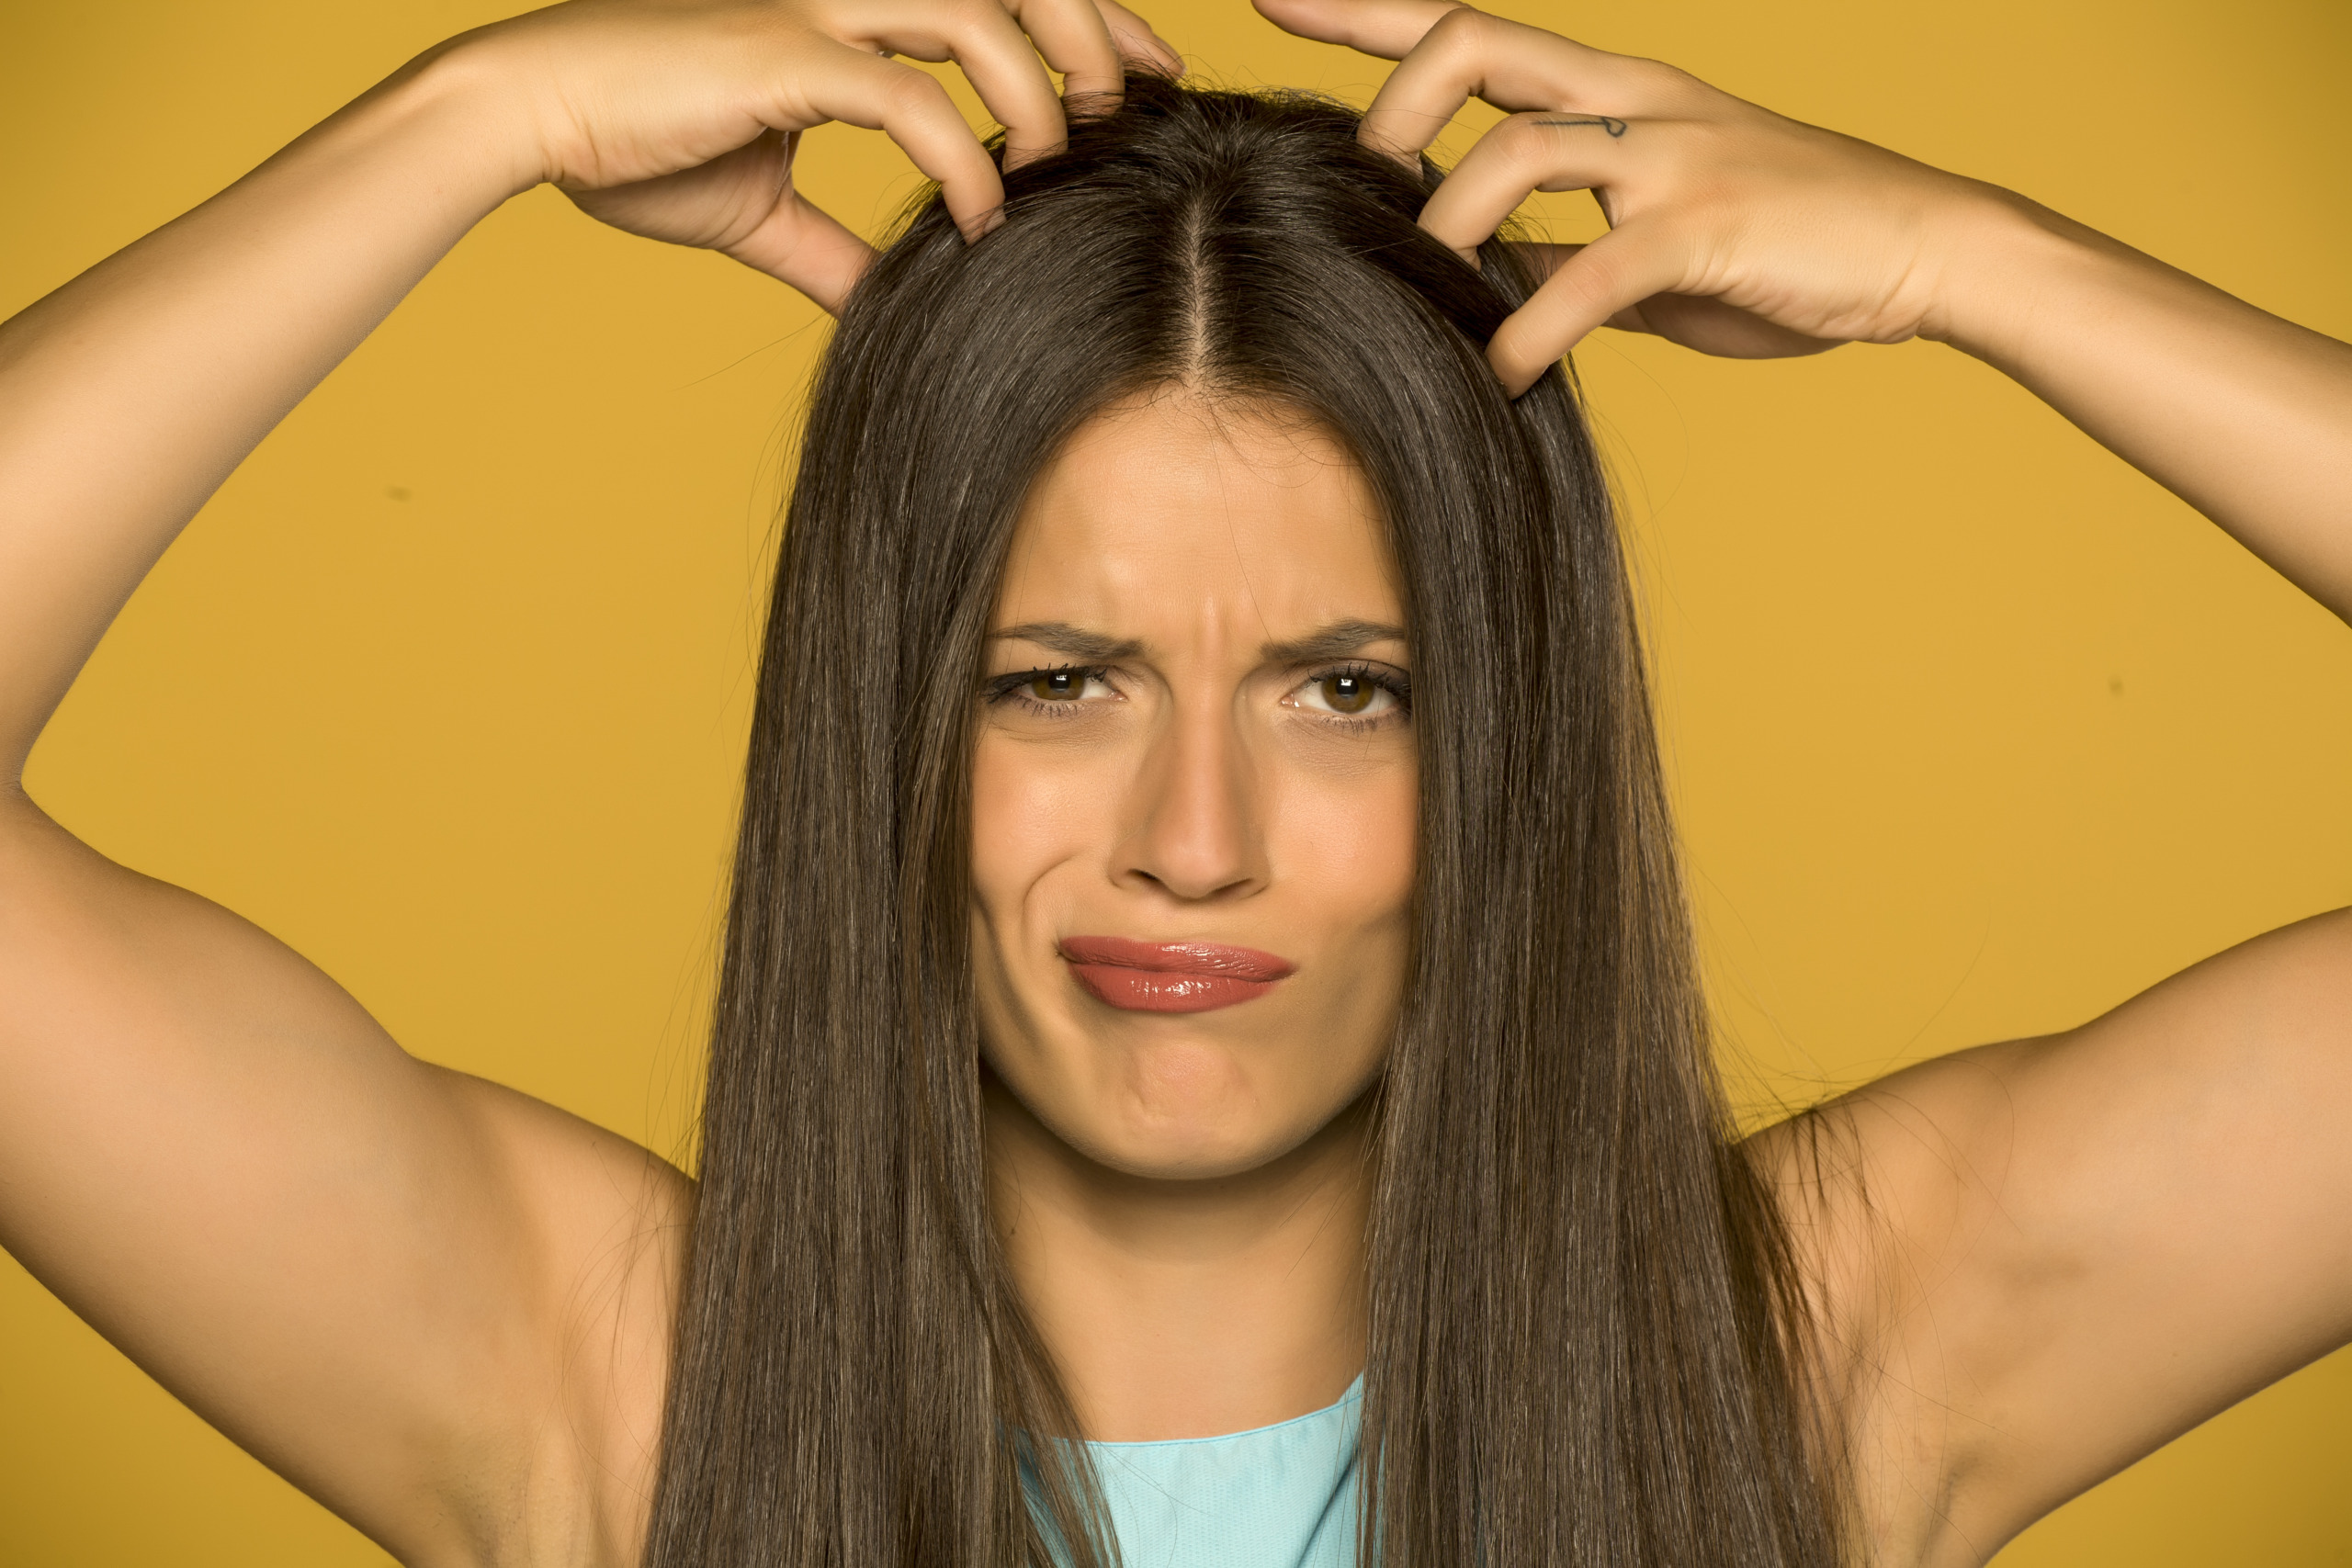 Does An Itchy Scalp Mean My Hair Is Growing? - Wimpole Clinic